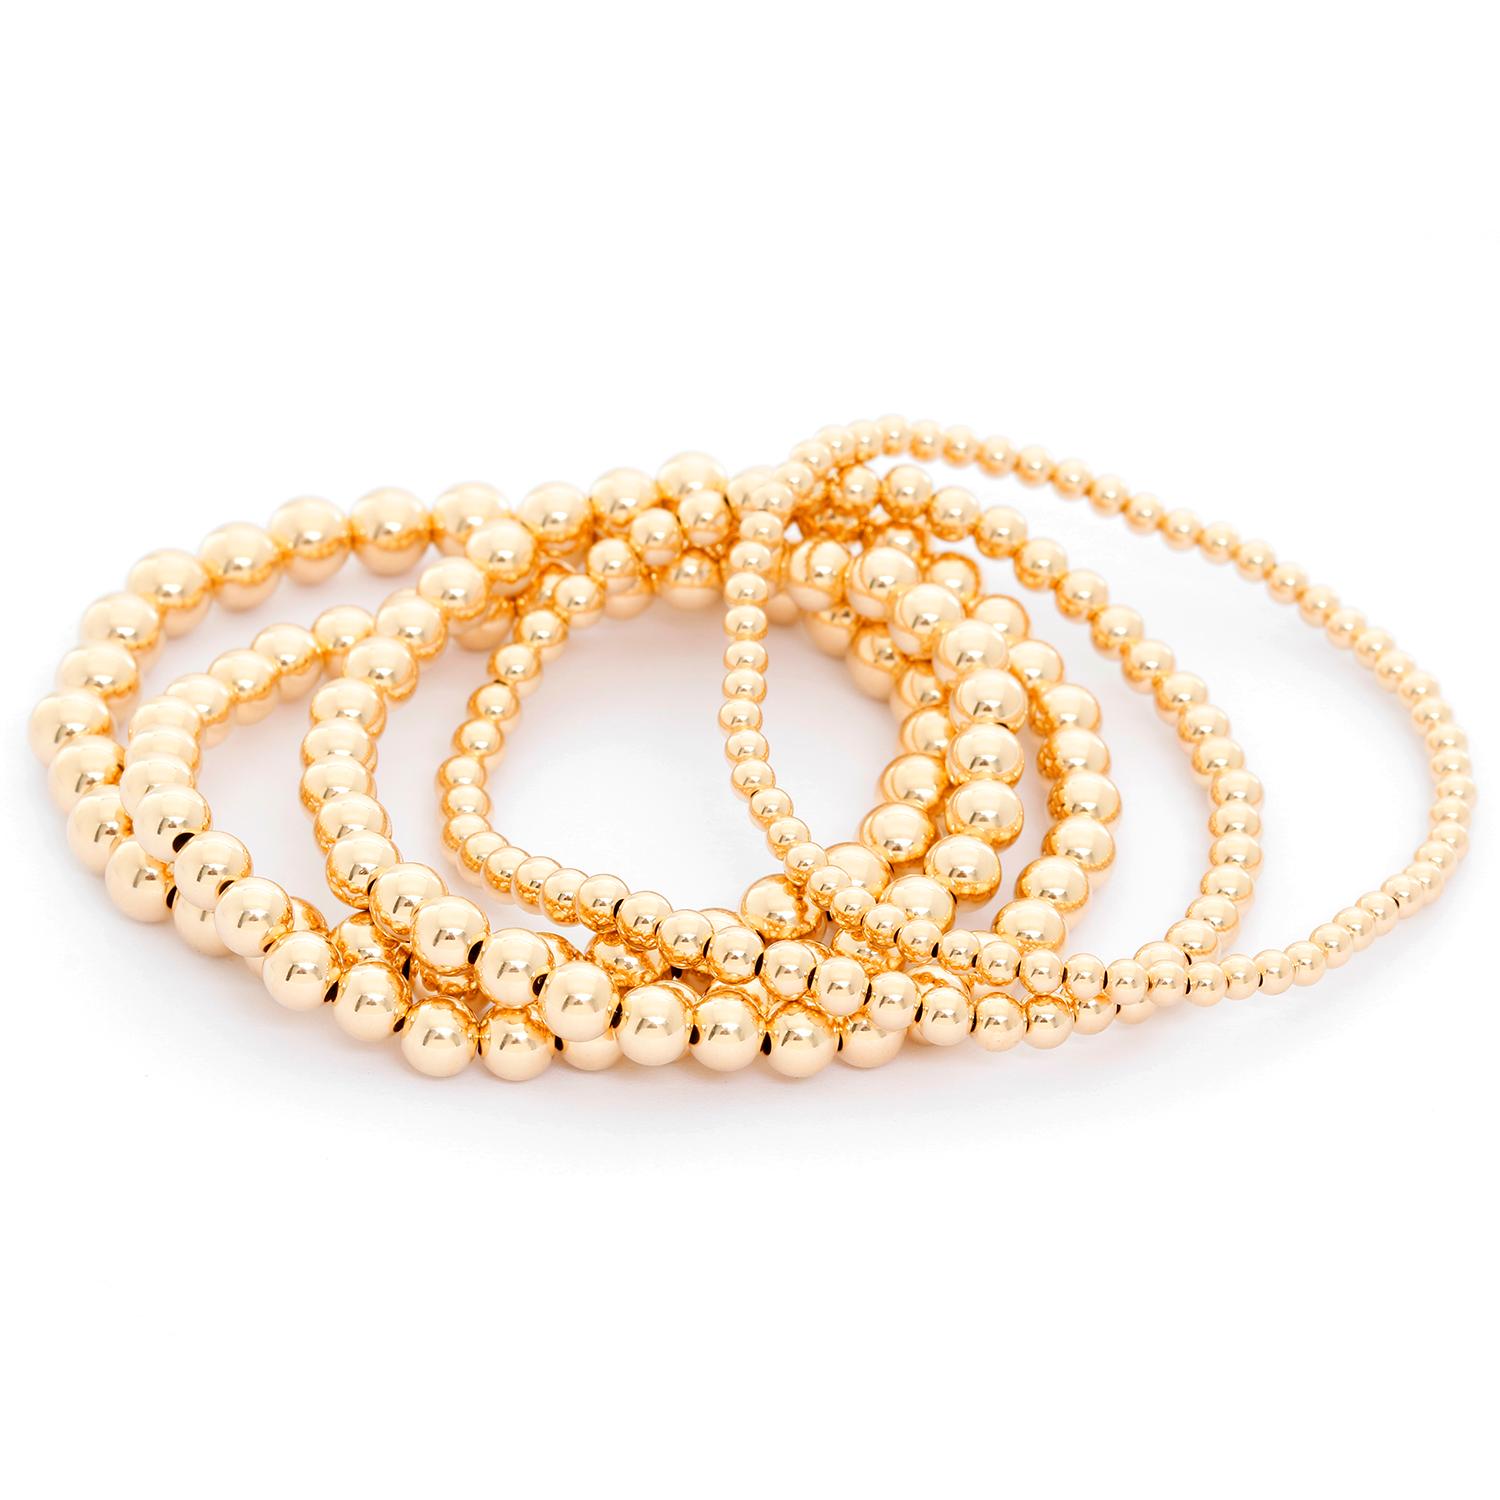 Gold Bead Ball Stretch Bracelets - Five stack-able bead bracelet. Pictured  one 3 mm, one 4 mm, two 5mm, one 6mm.  New with DeMesy pouch. Wearable all day and in the shower and they will still hold their luster and stretch.